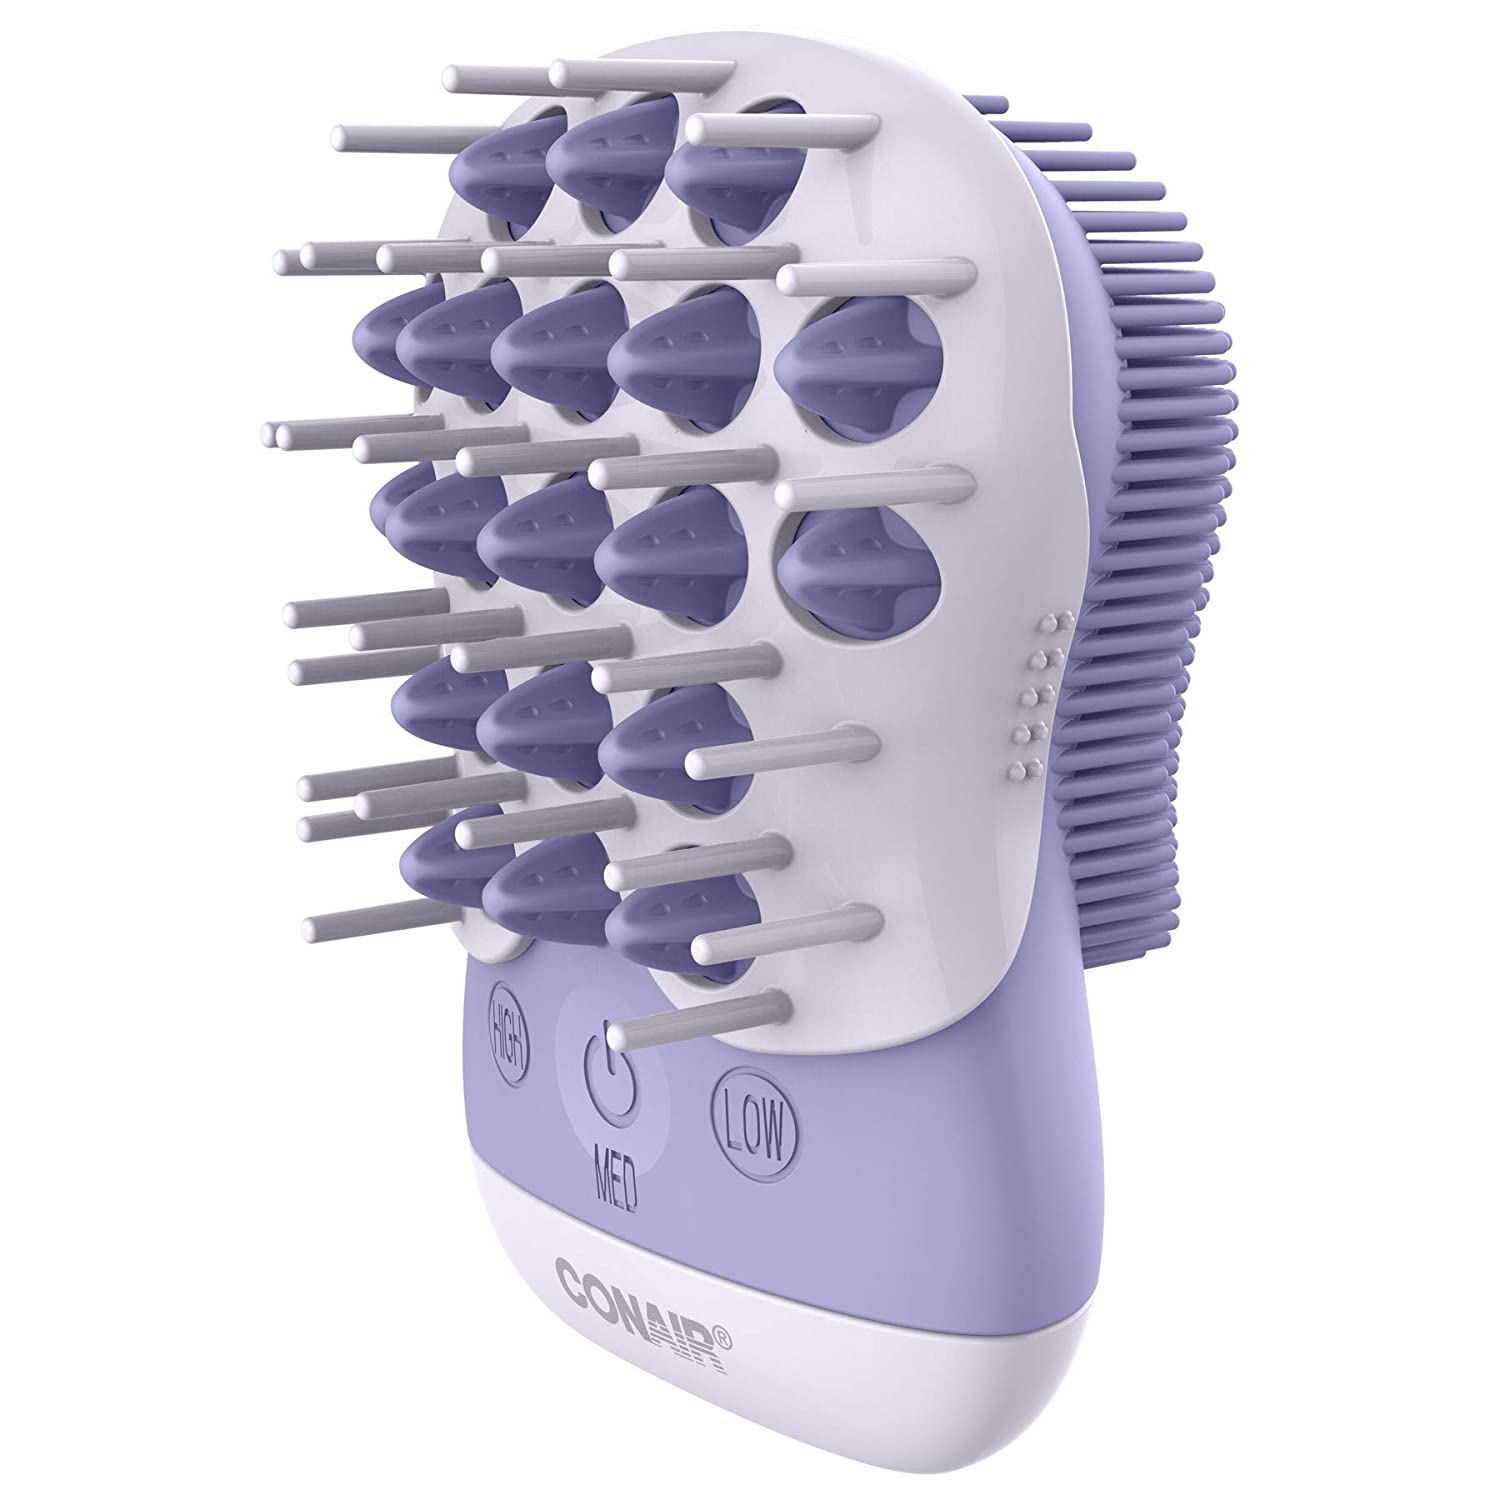 True Glow by Conair Hair Scalp Massager with Removable Detangling Silicone Comb, Shampoo Brush & Body Exfoliator - FCB10